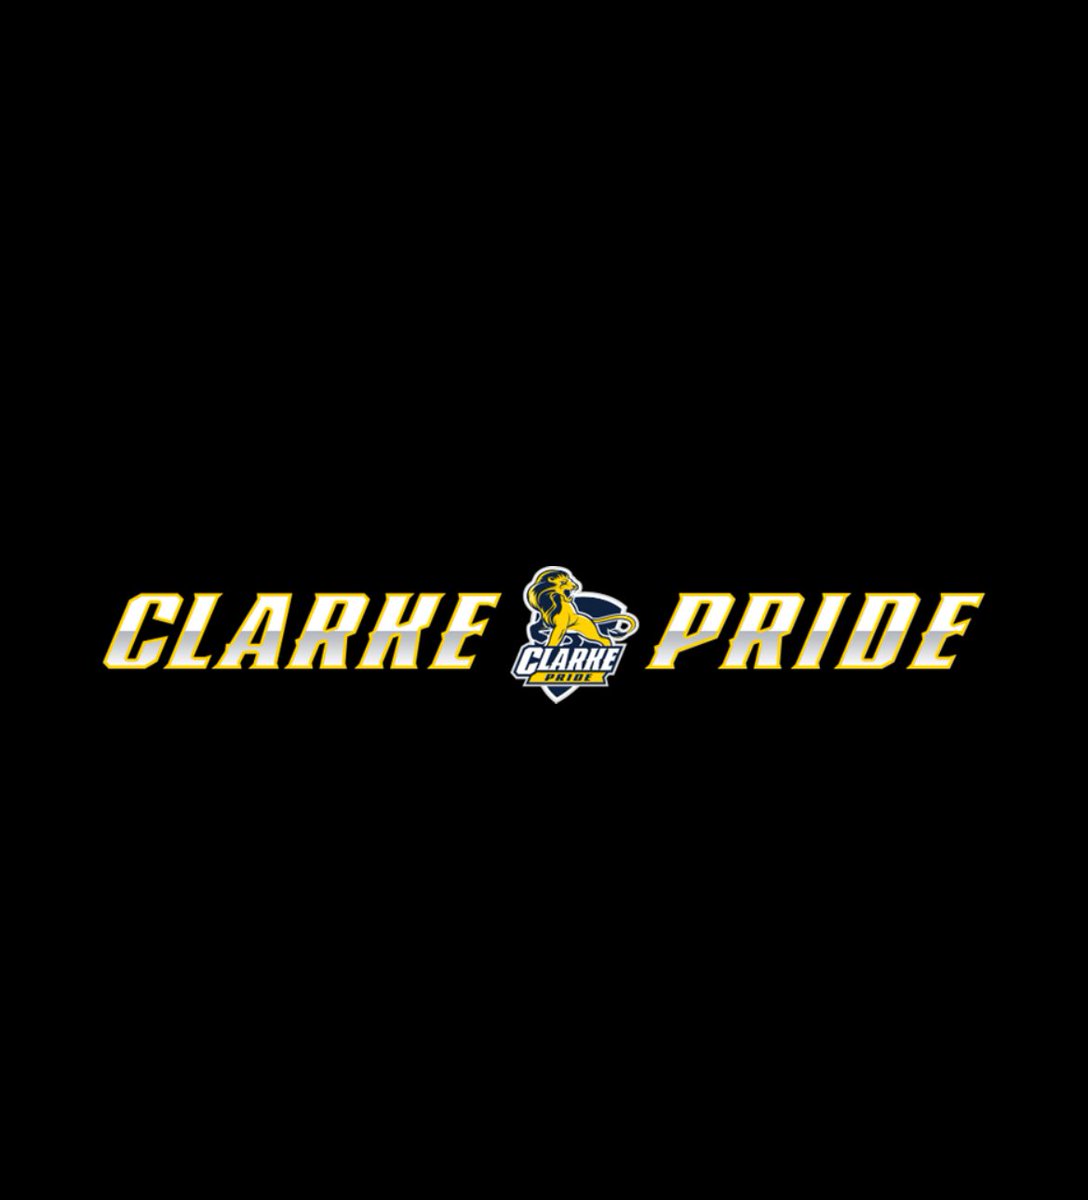 I am blessed to receive my first official offer to continue my academic and athletic career at Clarke University. #AGTG #CO24 @CUTFXC @BelairTrack @DavisKl15